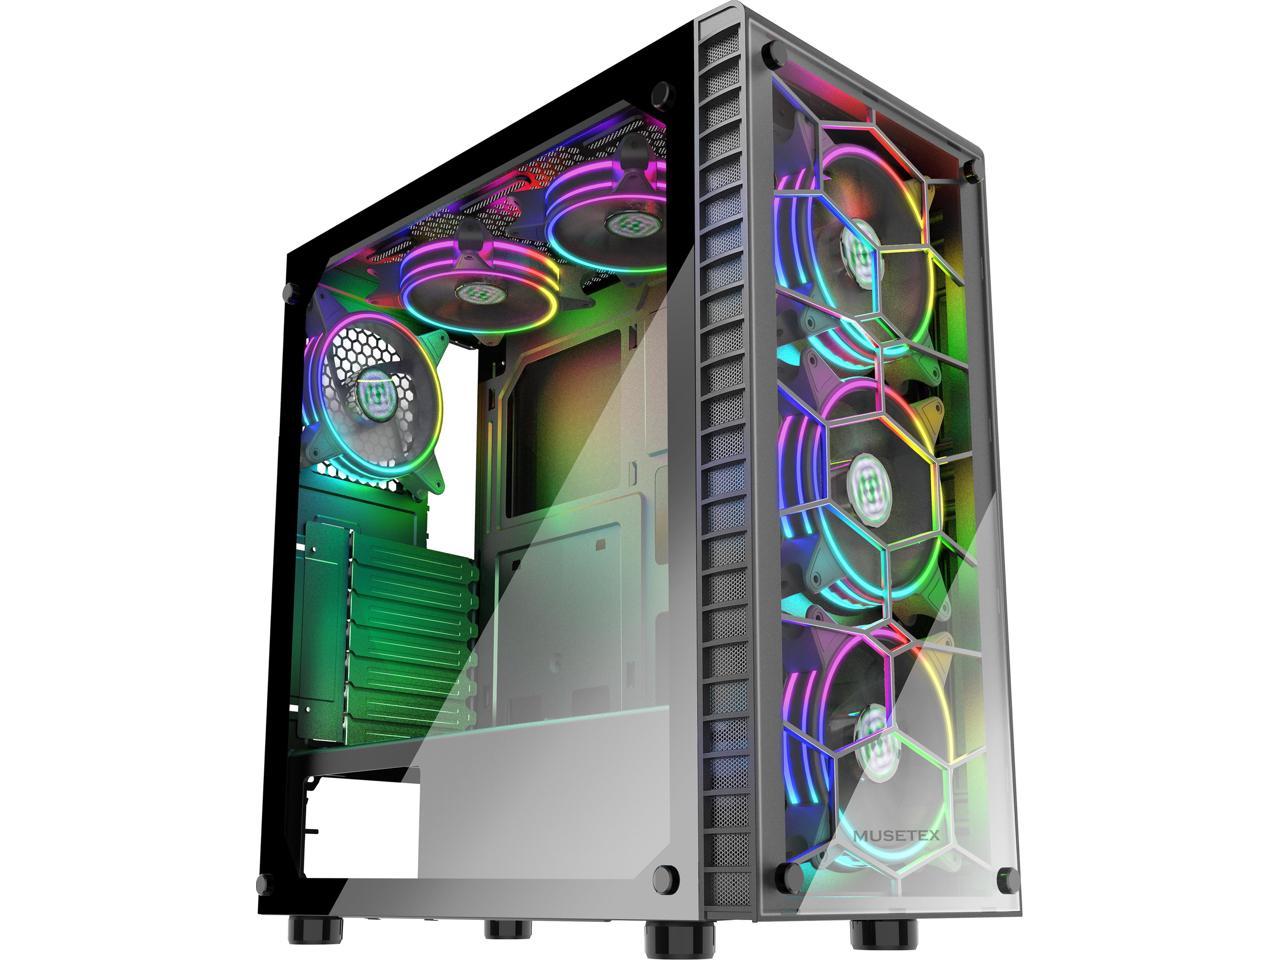 903N6 MUSETEX ATX Mid Tower Gaming Computer Case 6 RGB LED Fans 2 Translucent Tempered Glass Panels USB 3.0 Port,Cable Management/Airflow Gaming Style Window Case 